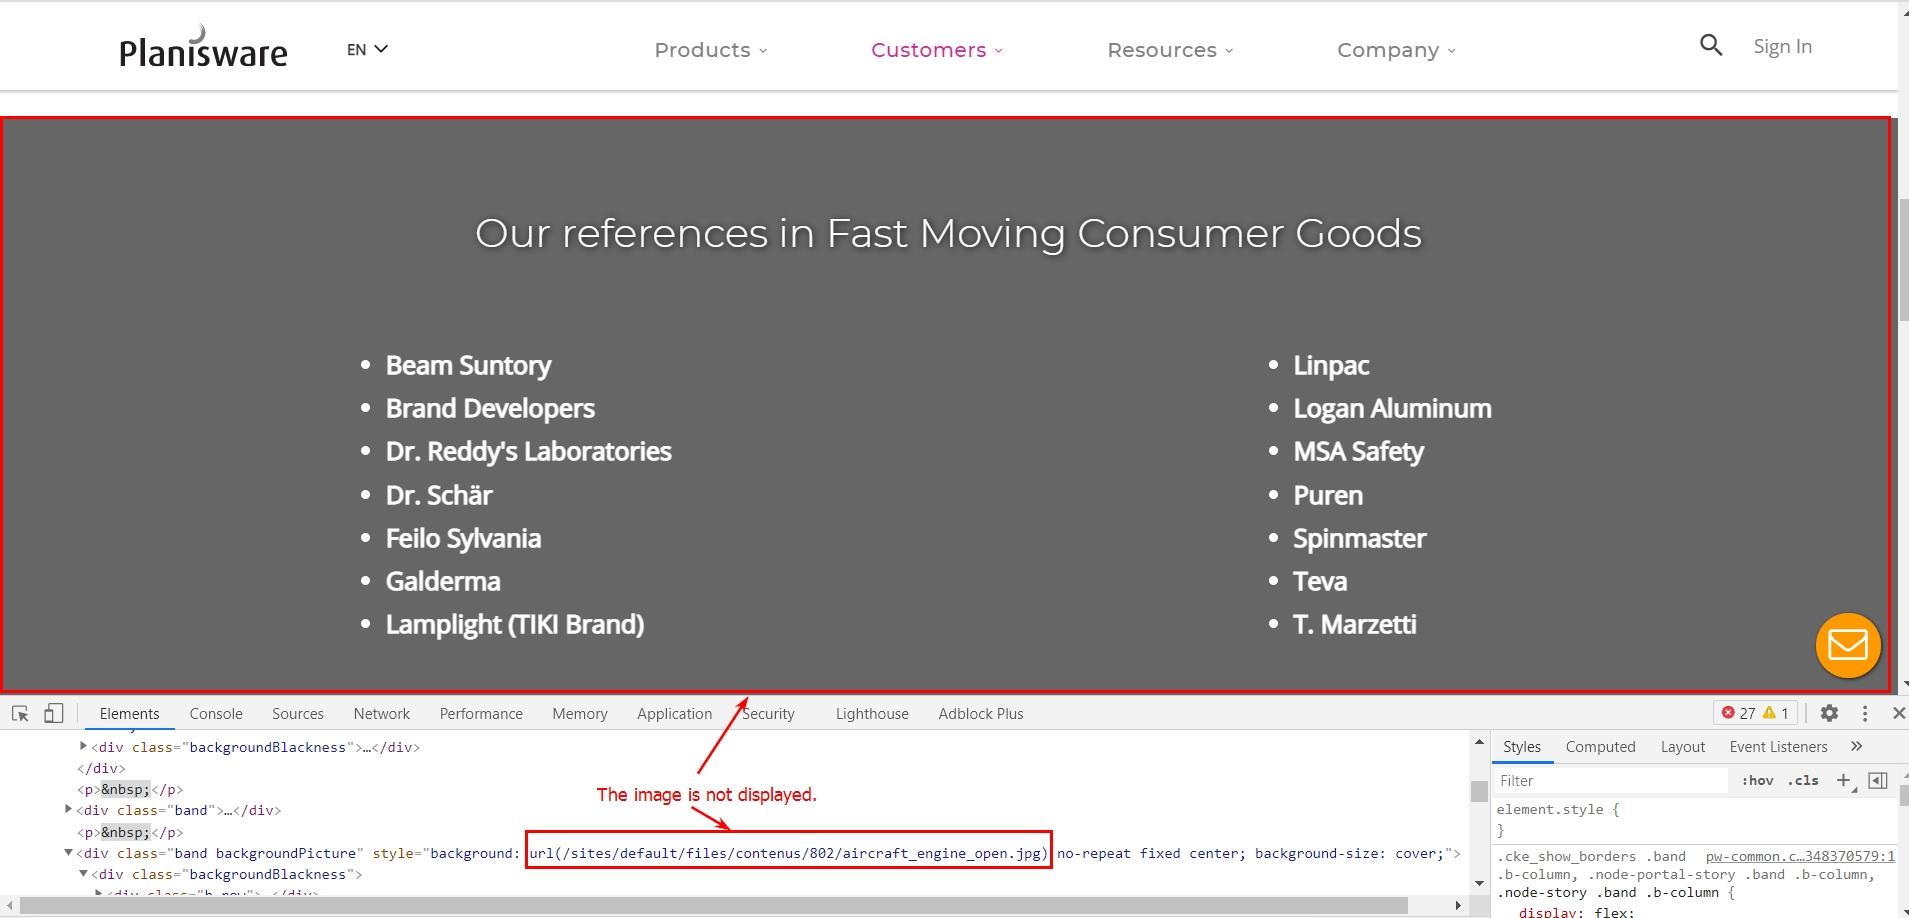 The 'Our references in Fast Moving Consumer Goods' banner is not displayed.